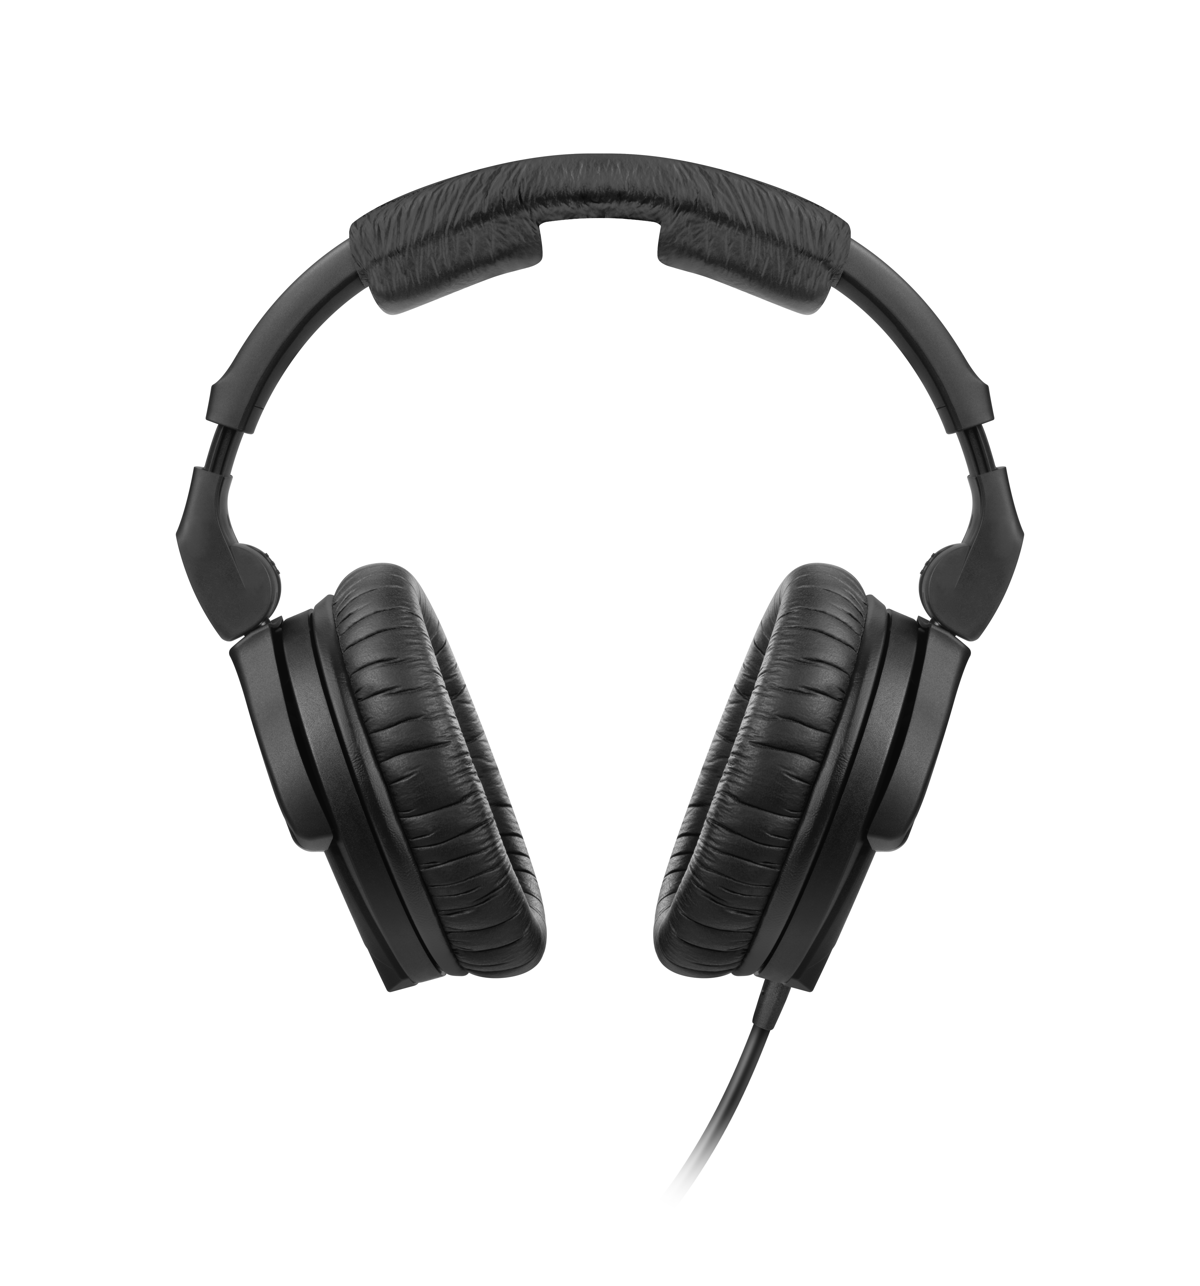 Give a professional edge with the HD 280 PRO monitoring headphones